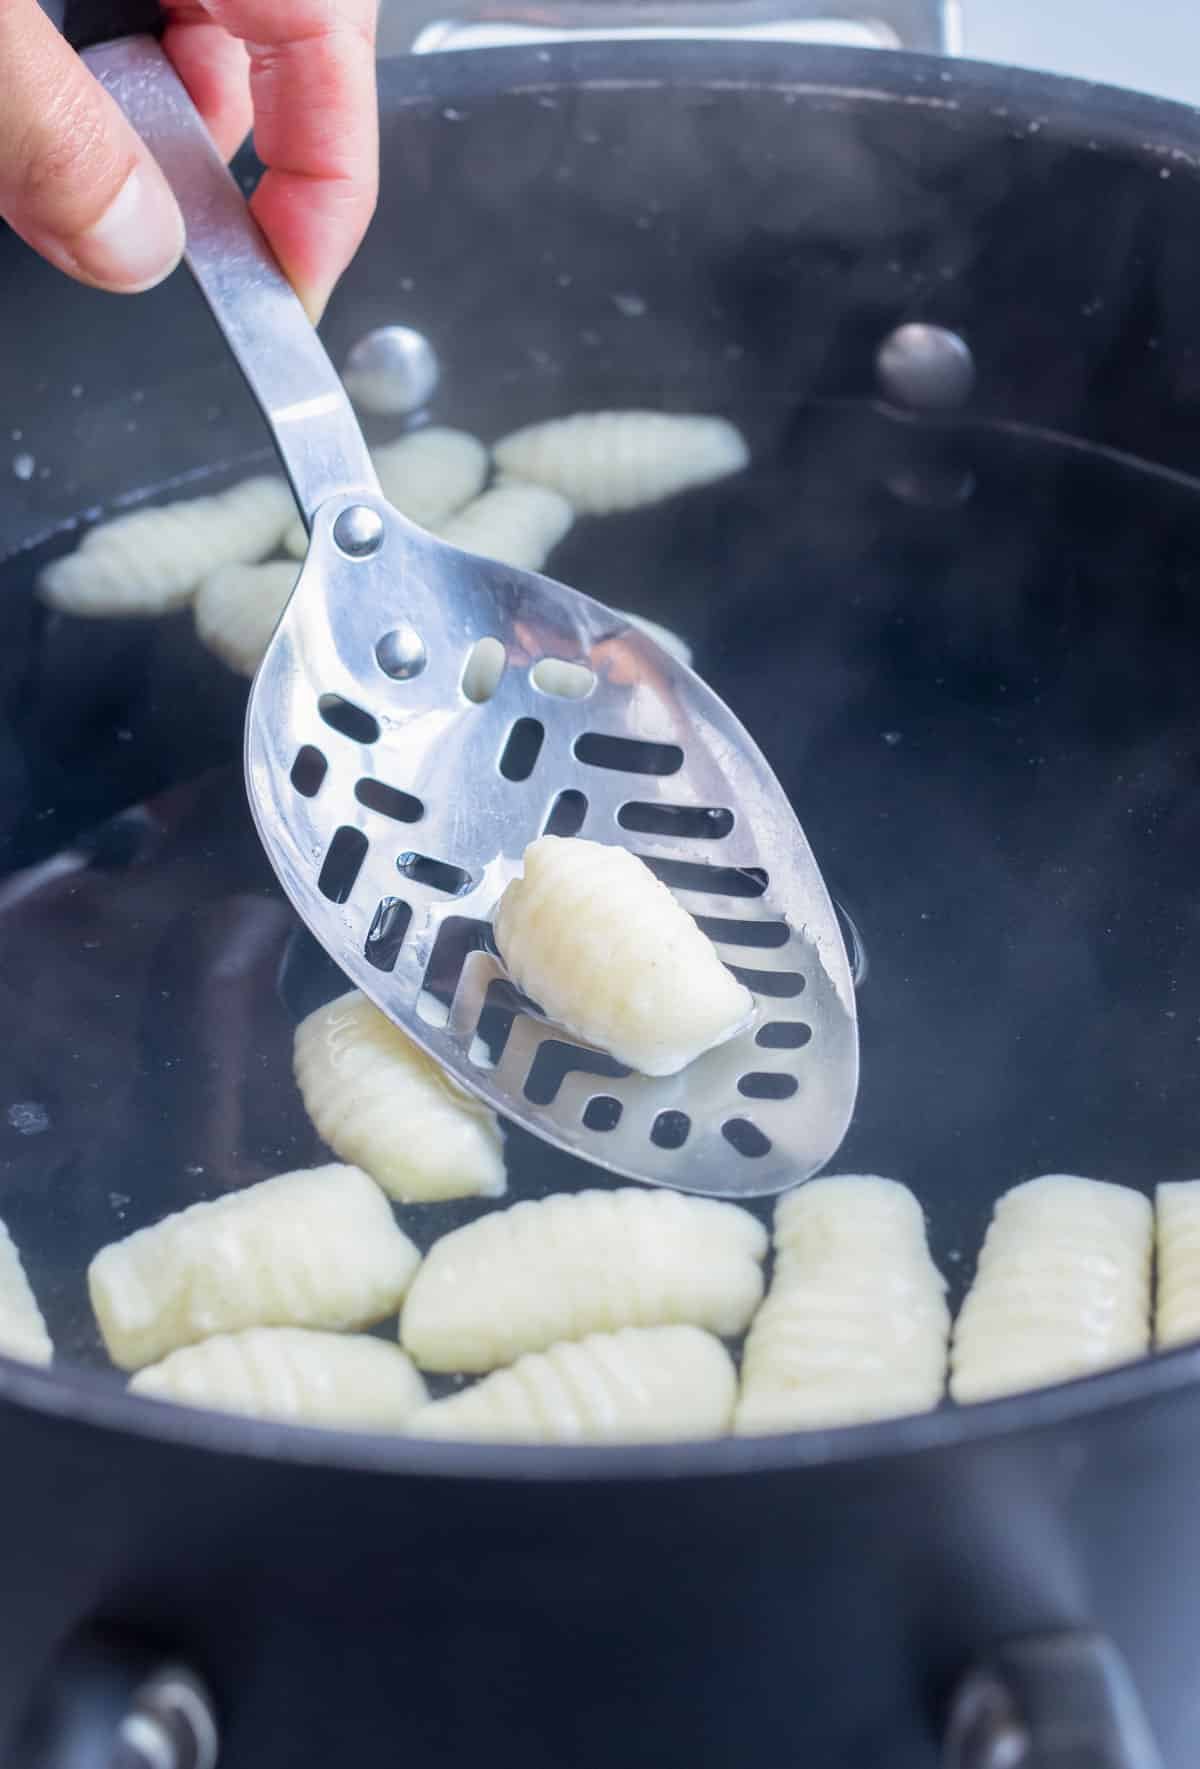 Gnocchi is boiled in a pot before it floats.